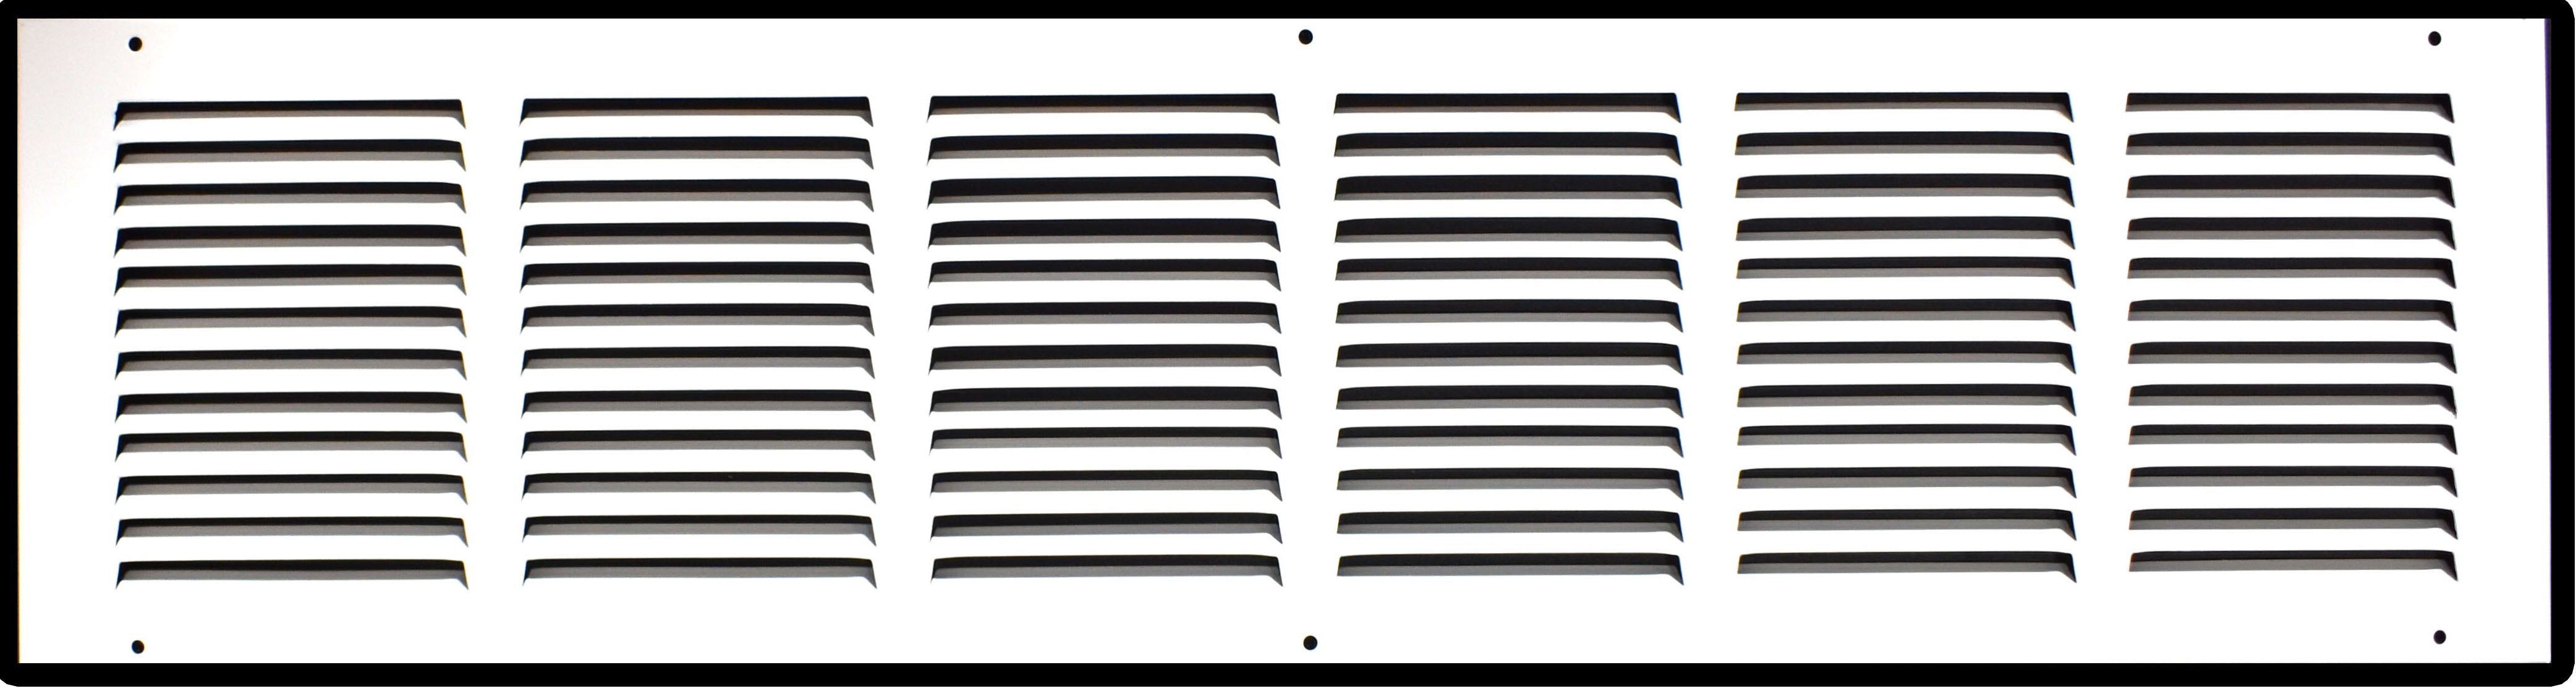 airgrilles 30" x 6" duct opening hd steel return air grille for sidewall and ceilingagc7agc-flt-wh-30x6 756014649697 1